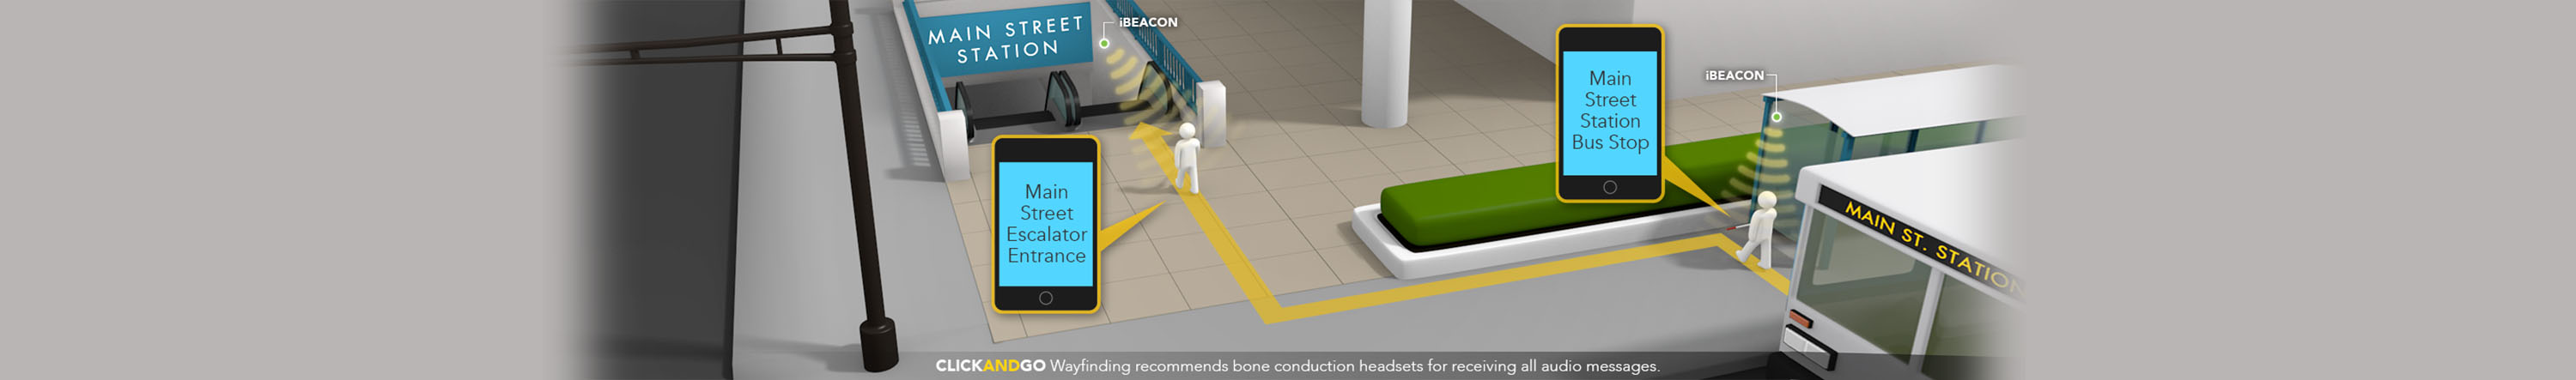 Graphic illustration showing blind pedestrian traveling route from bus stop to subway entrance. This image illustrates the messaging support of beacons, as it announces the traveler is approaching the escalator entrance of the subway station.